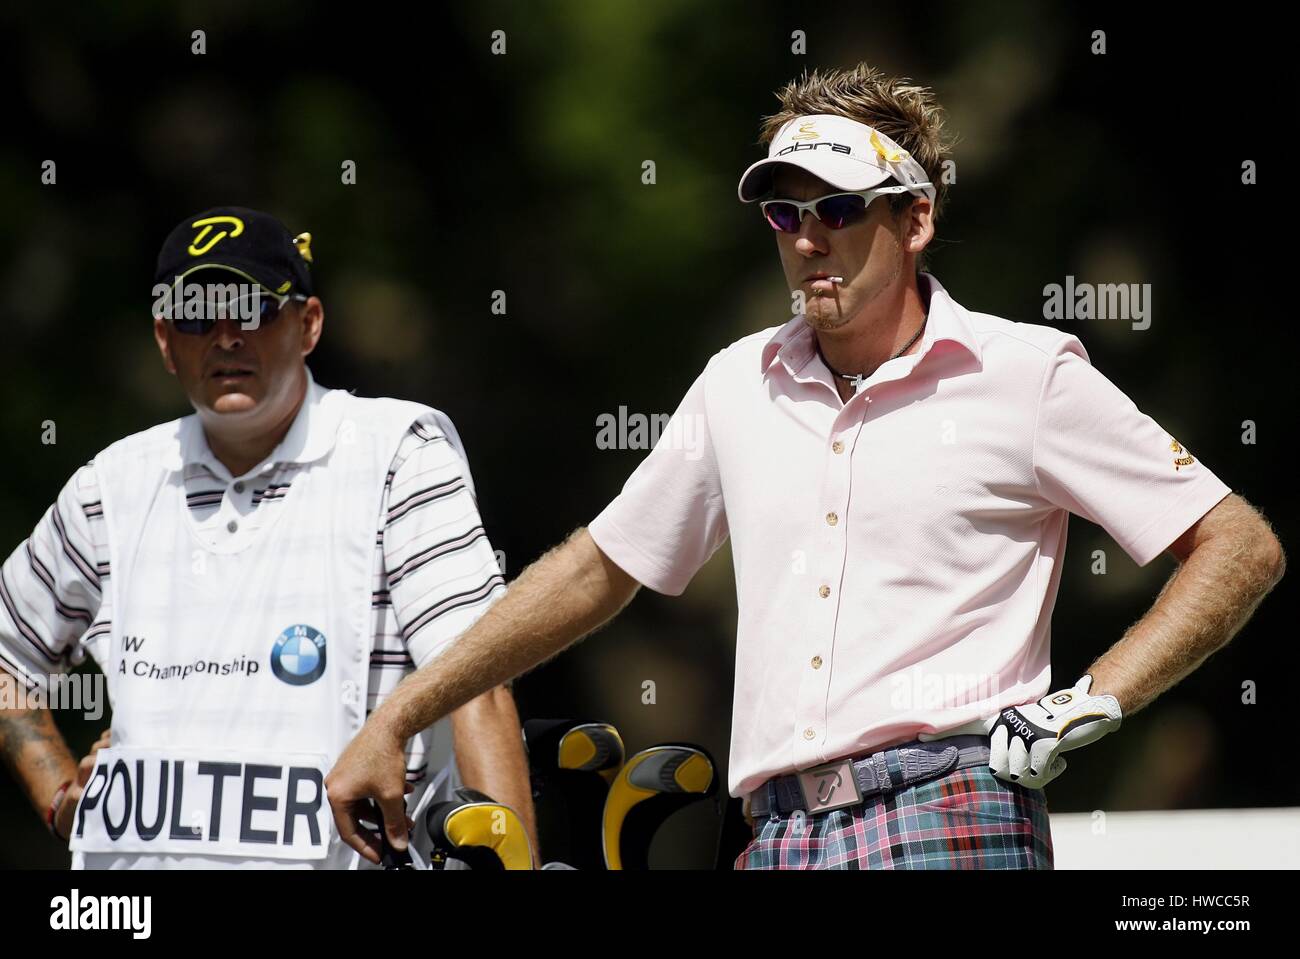 IAN POULTER ENGLAND WENTWORTH CLUB SURREY ENGLAND 25 May 2007 Stock Photo